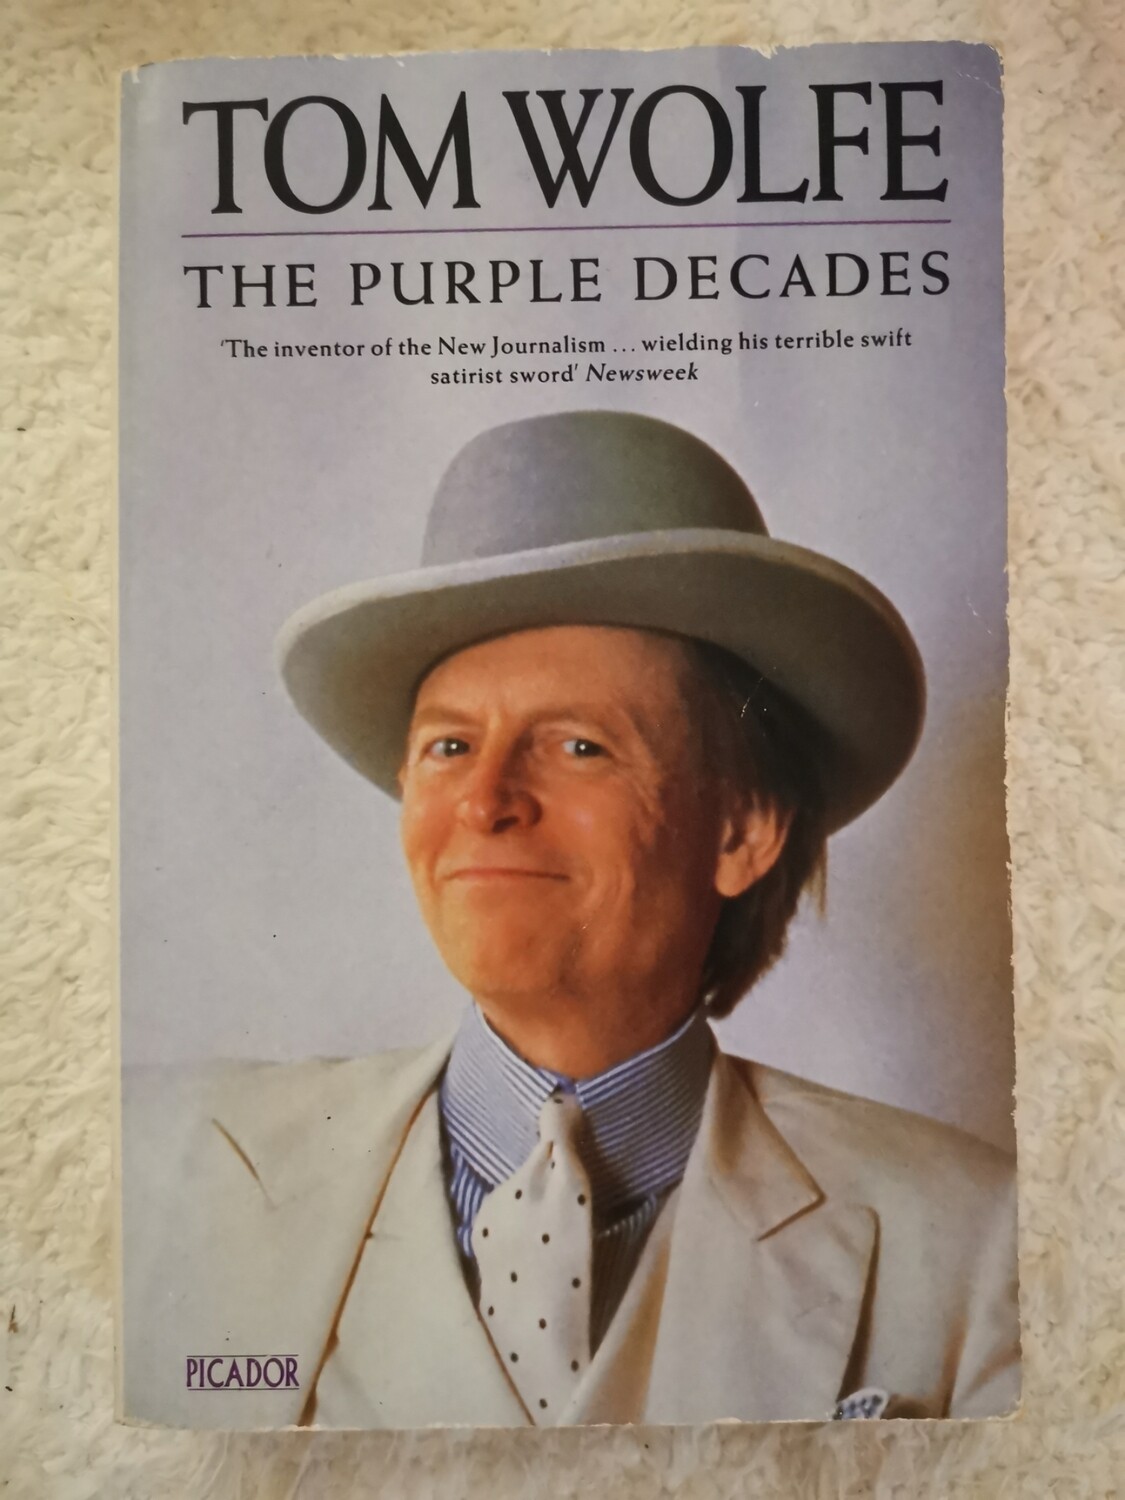 The purple decade's, Tom Wolfe